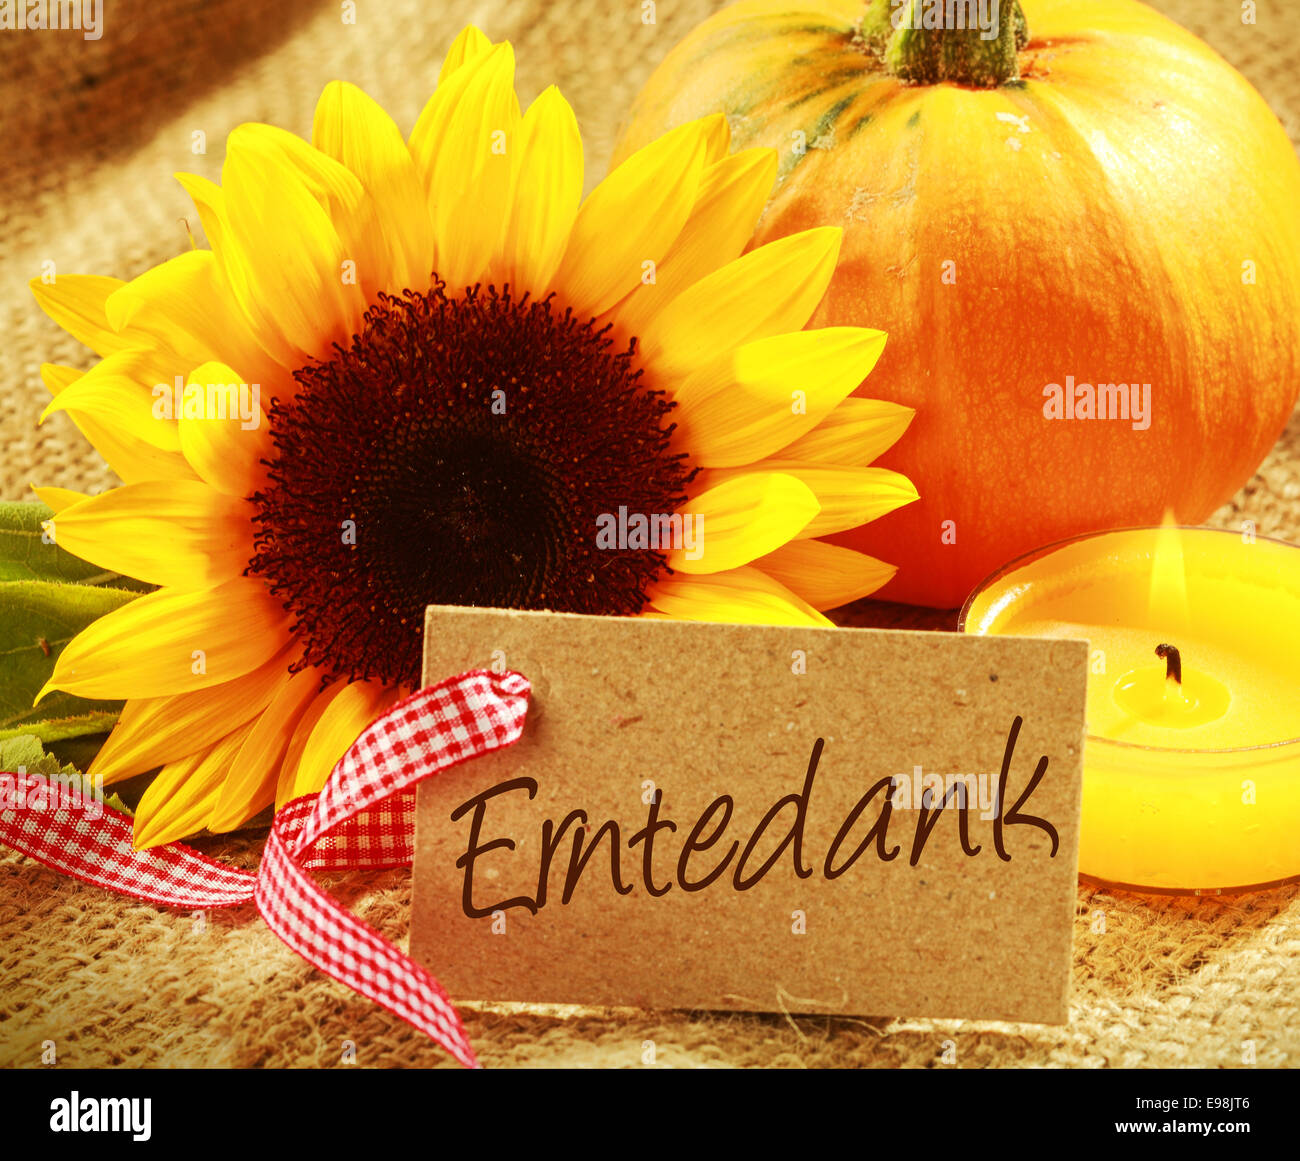 Colorful Thanksgiving background with a gift tag with the German word - Erntedank - with a vibrant yellow sunflower orange pumpkin and burning candle grouped on rustic hessian Stock Photo